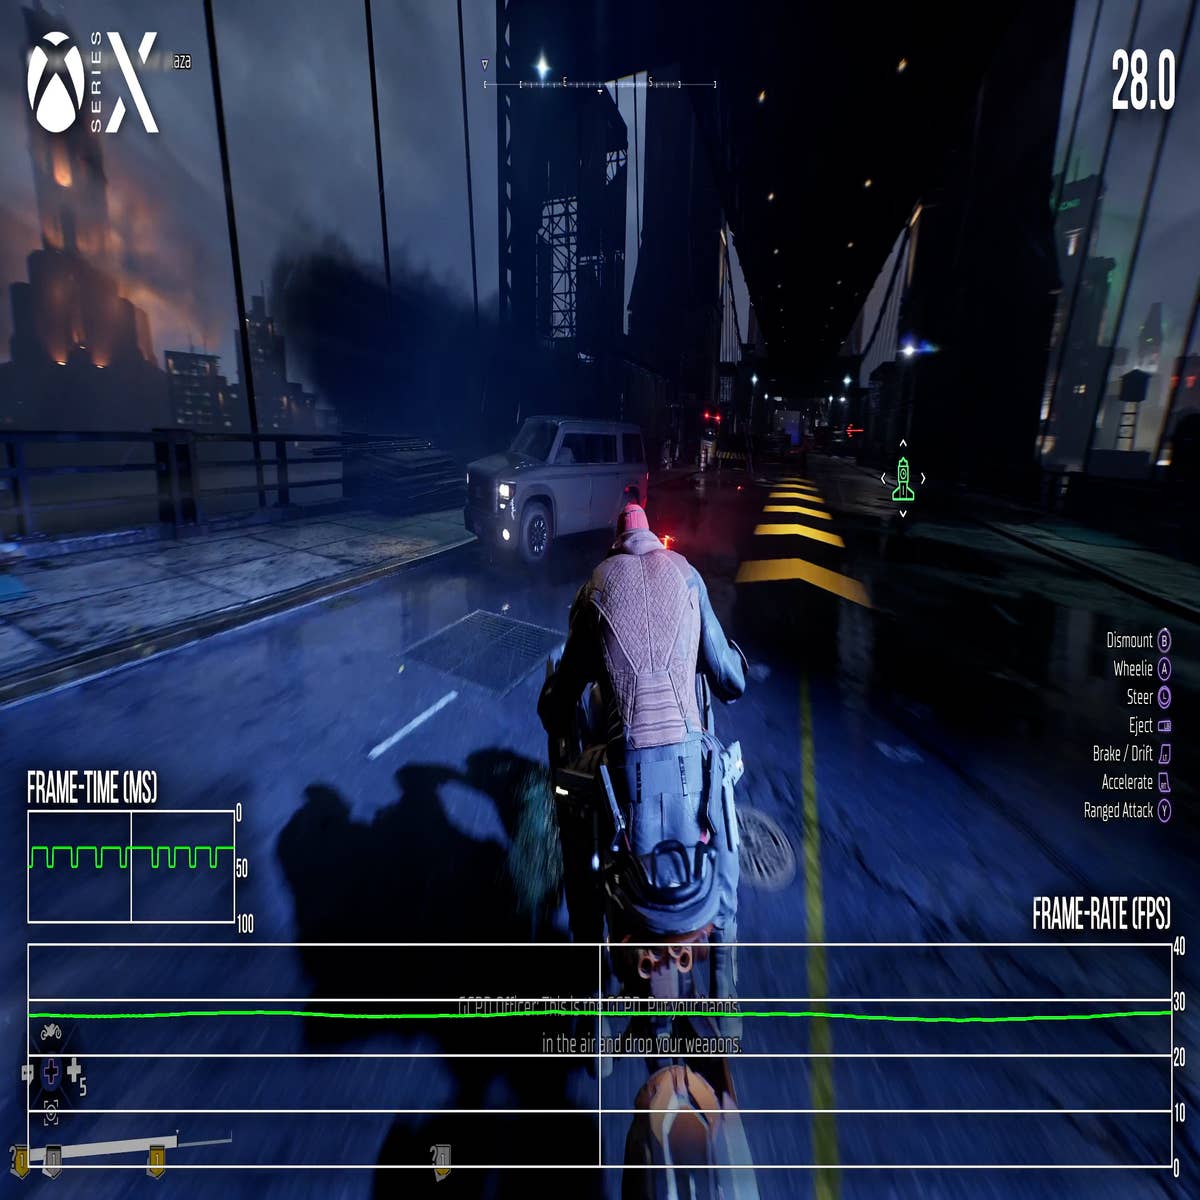 Check out 7-minutes of Gotham Knights gameplay from the pre-alpha build